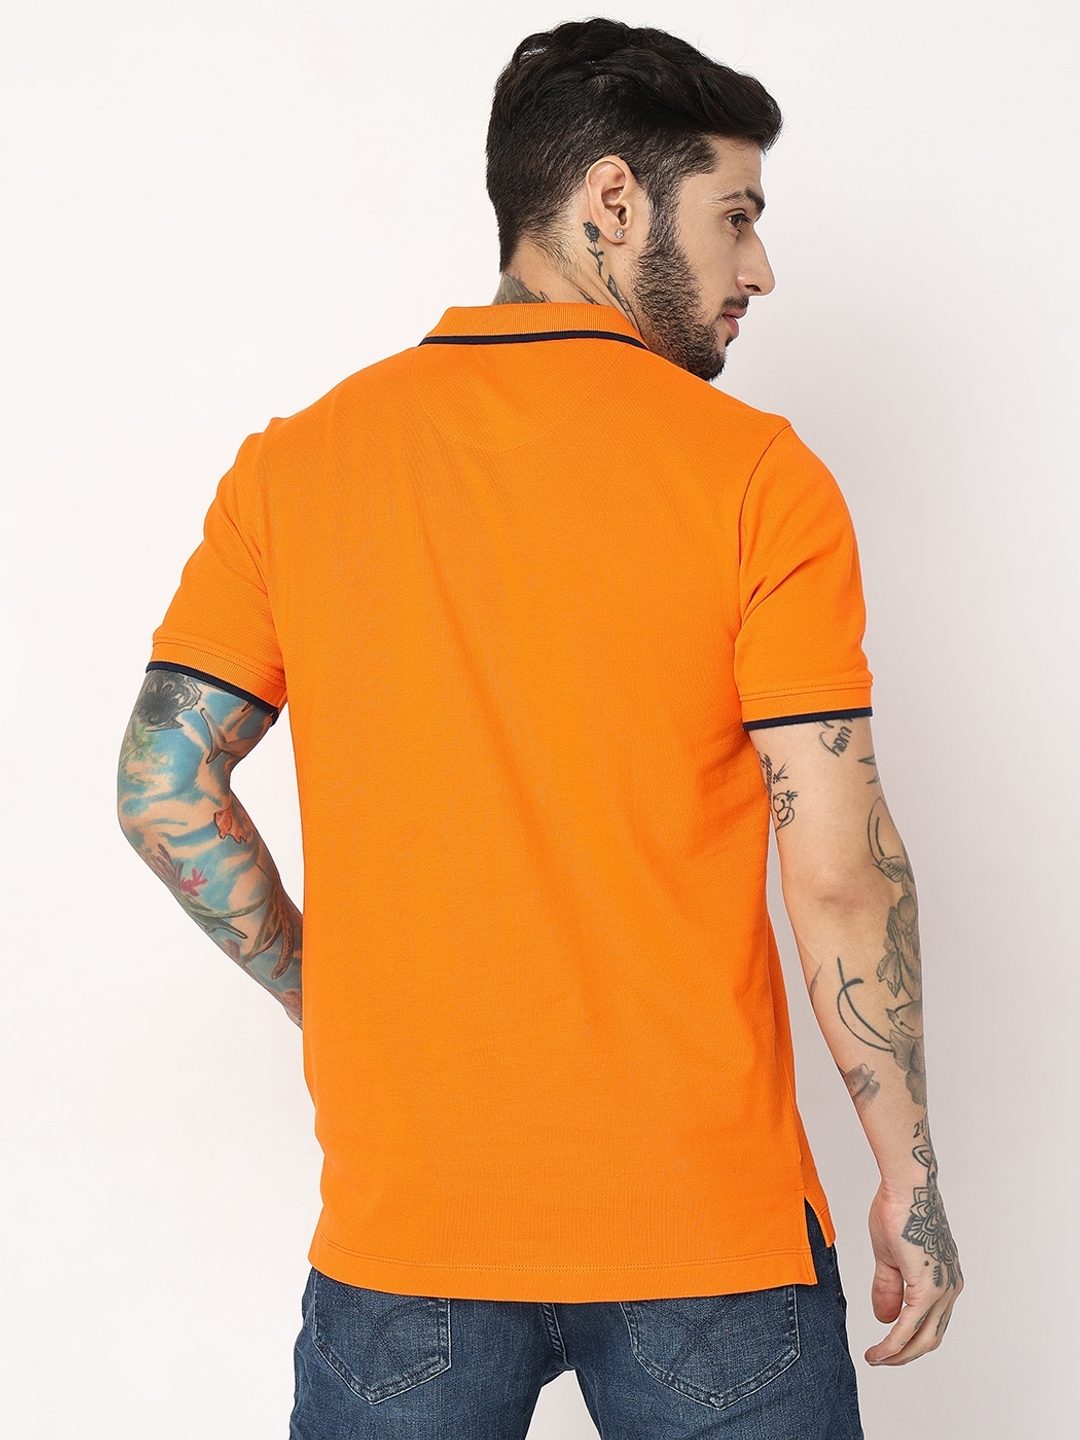 Relaxed Fit Half Sleeve Solid Polo T-Shirt